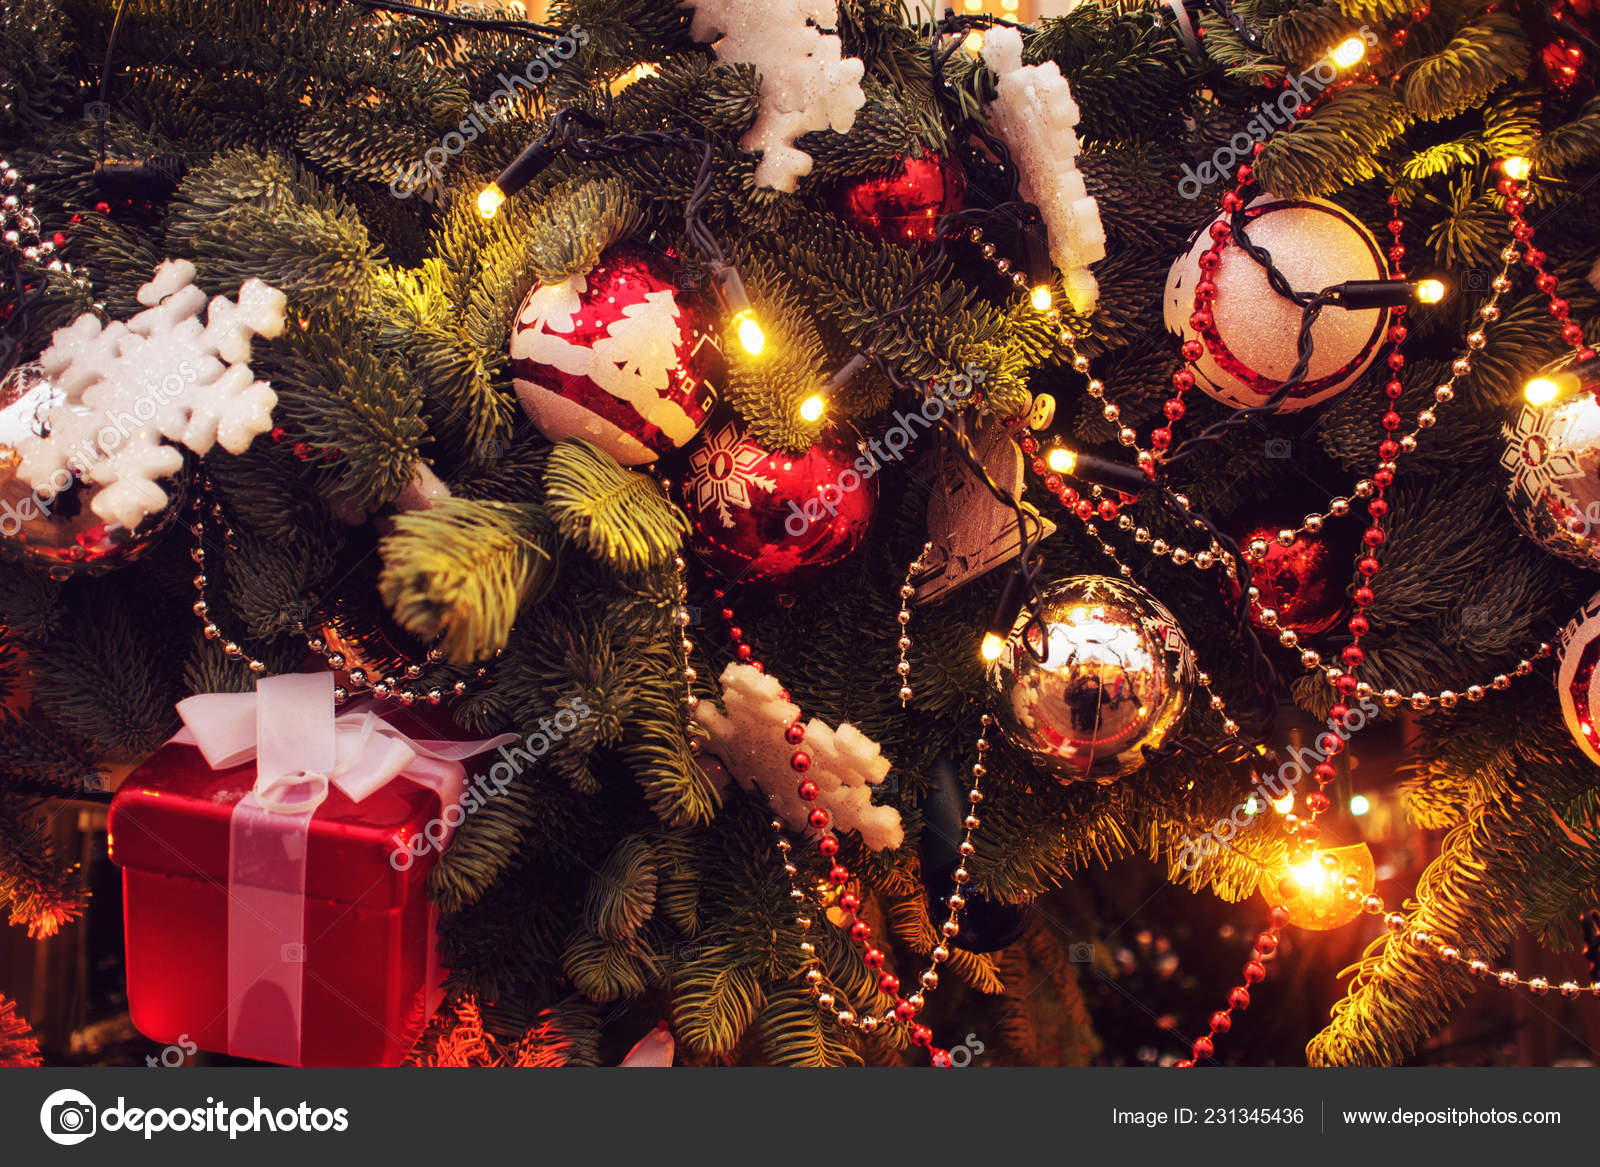 Download Festive Christmas Tree with Gold and Silver Decorations